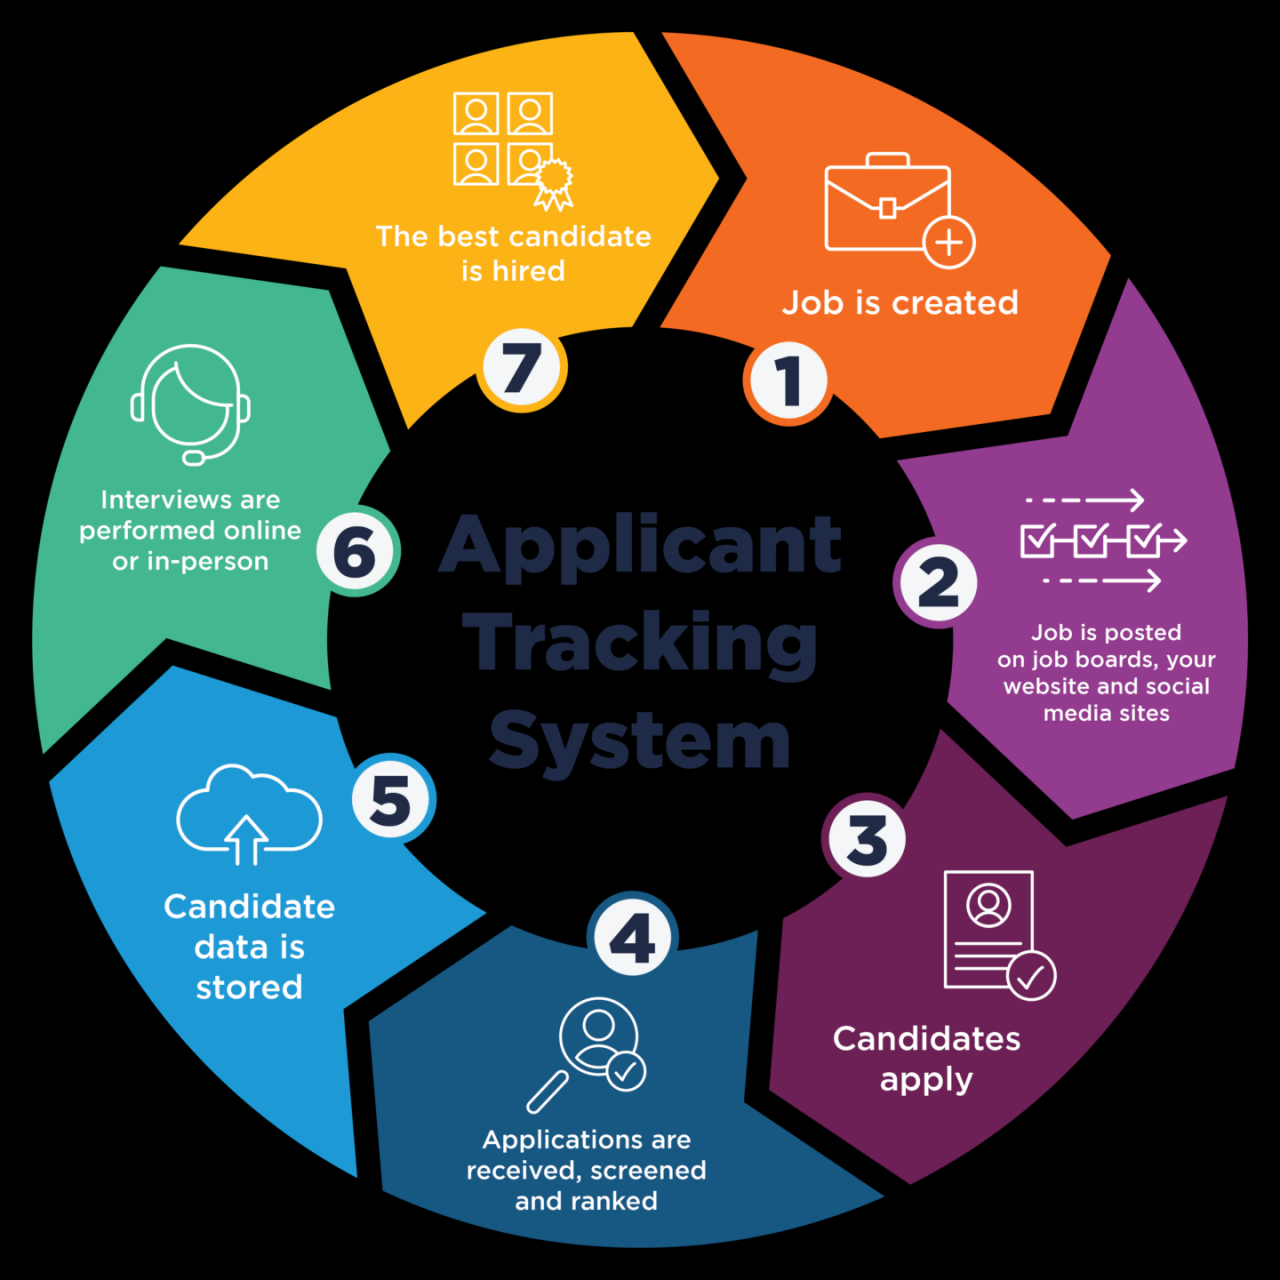 An applicant tracking system is